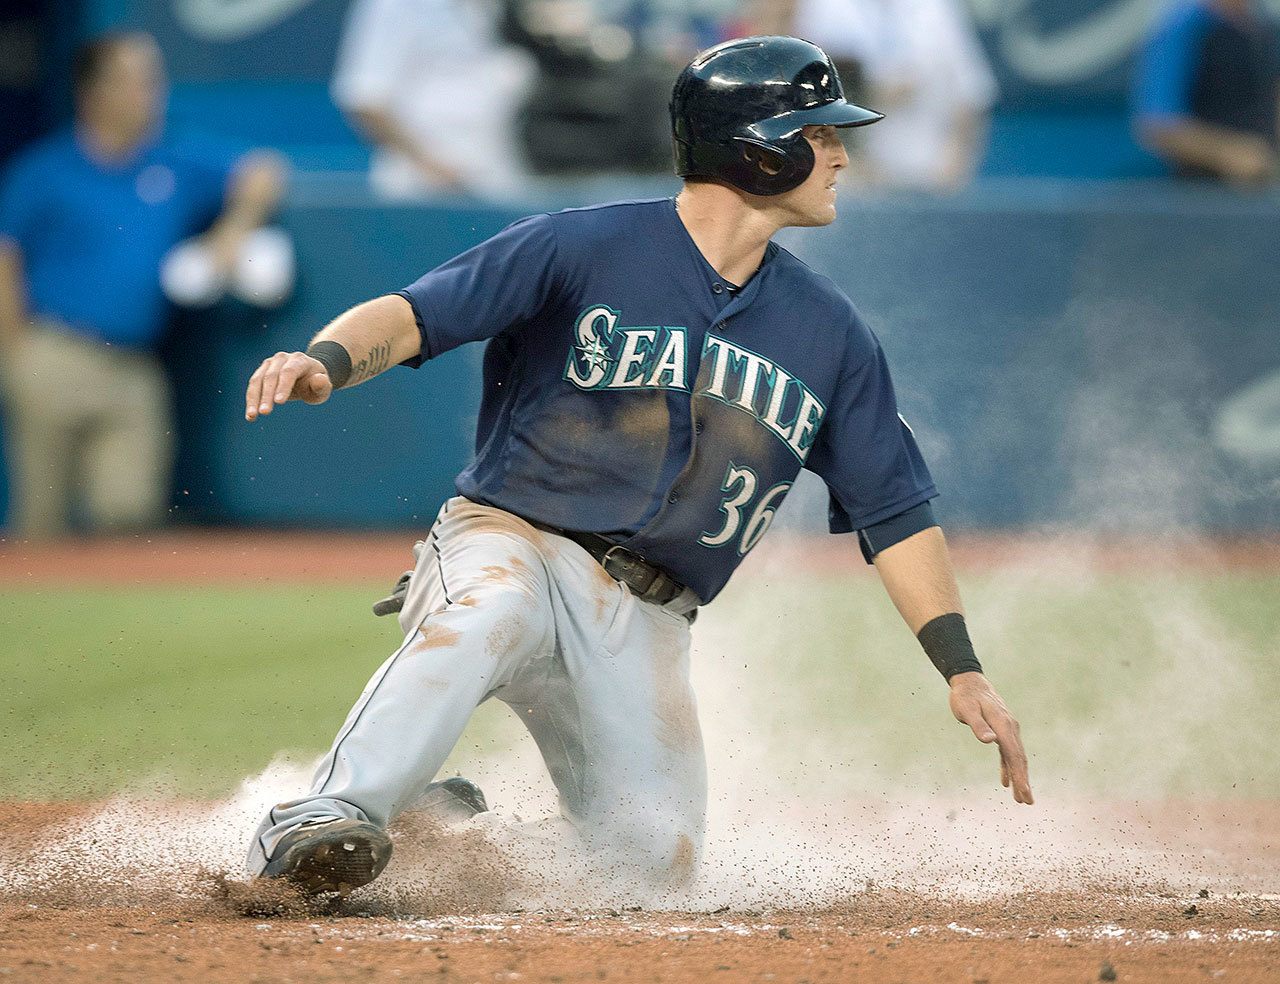 Seattle’s Shawn O’Malley scores on a double by teammate Seth Smith in the fifth inning of Friday night’s game against the Blue Jays in Toronto. (Fred Thornhill/The Canadian Press via AP)